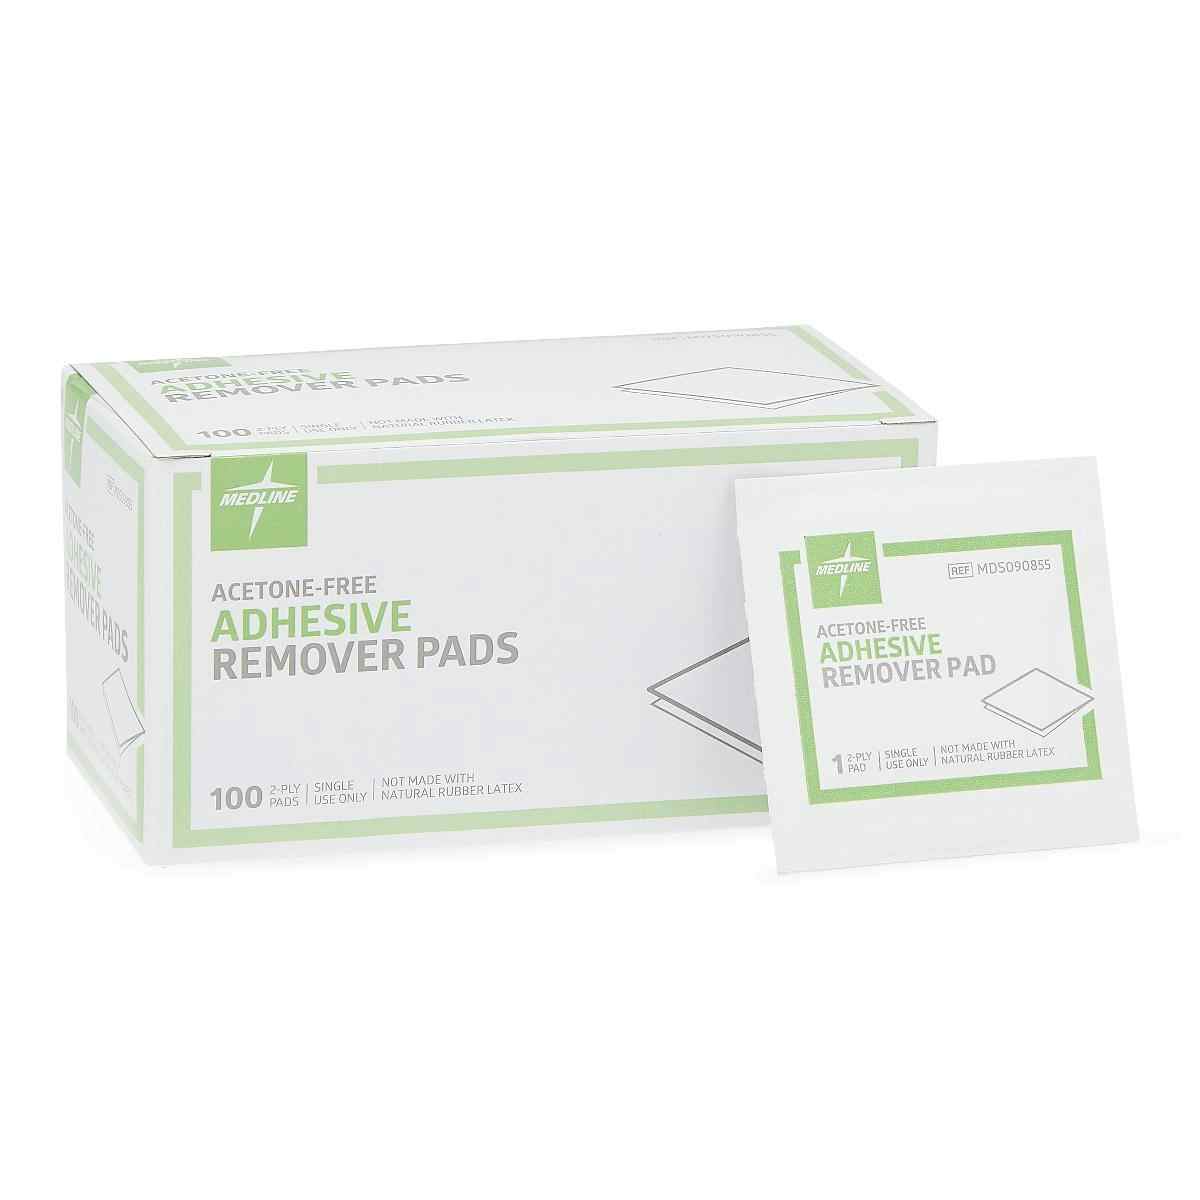 Medline Acetone-Free Adhesive Remover Pads, MDS090855H, Box of 100